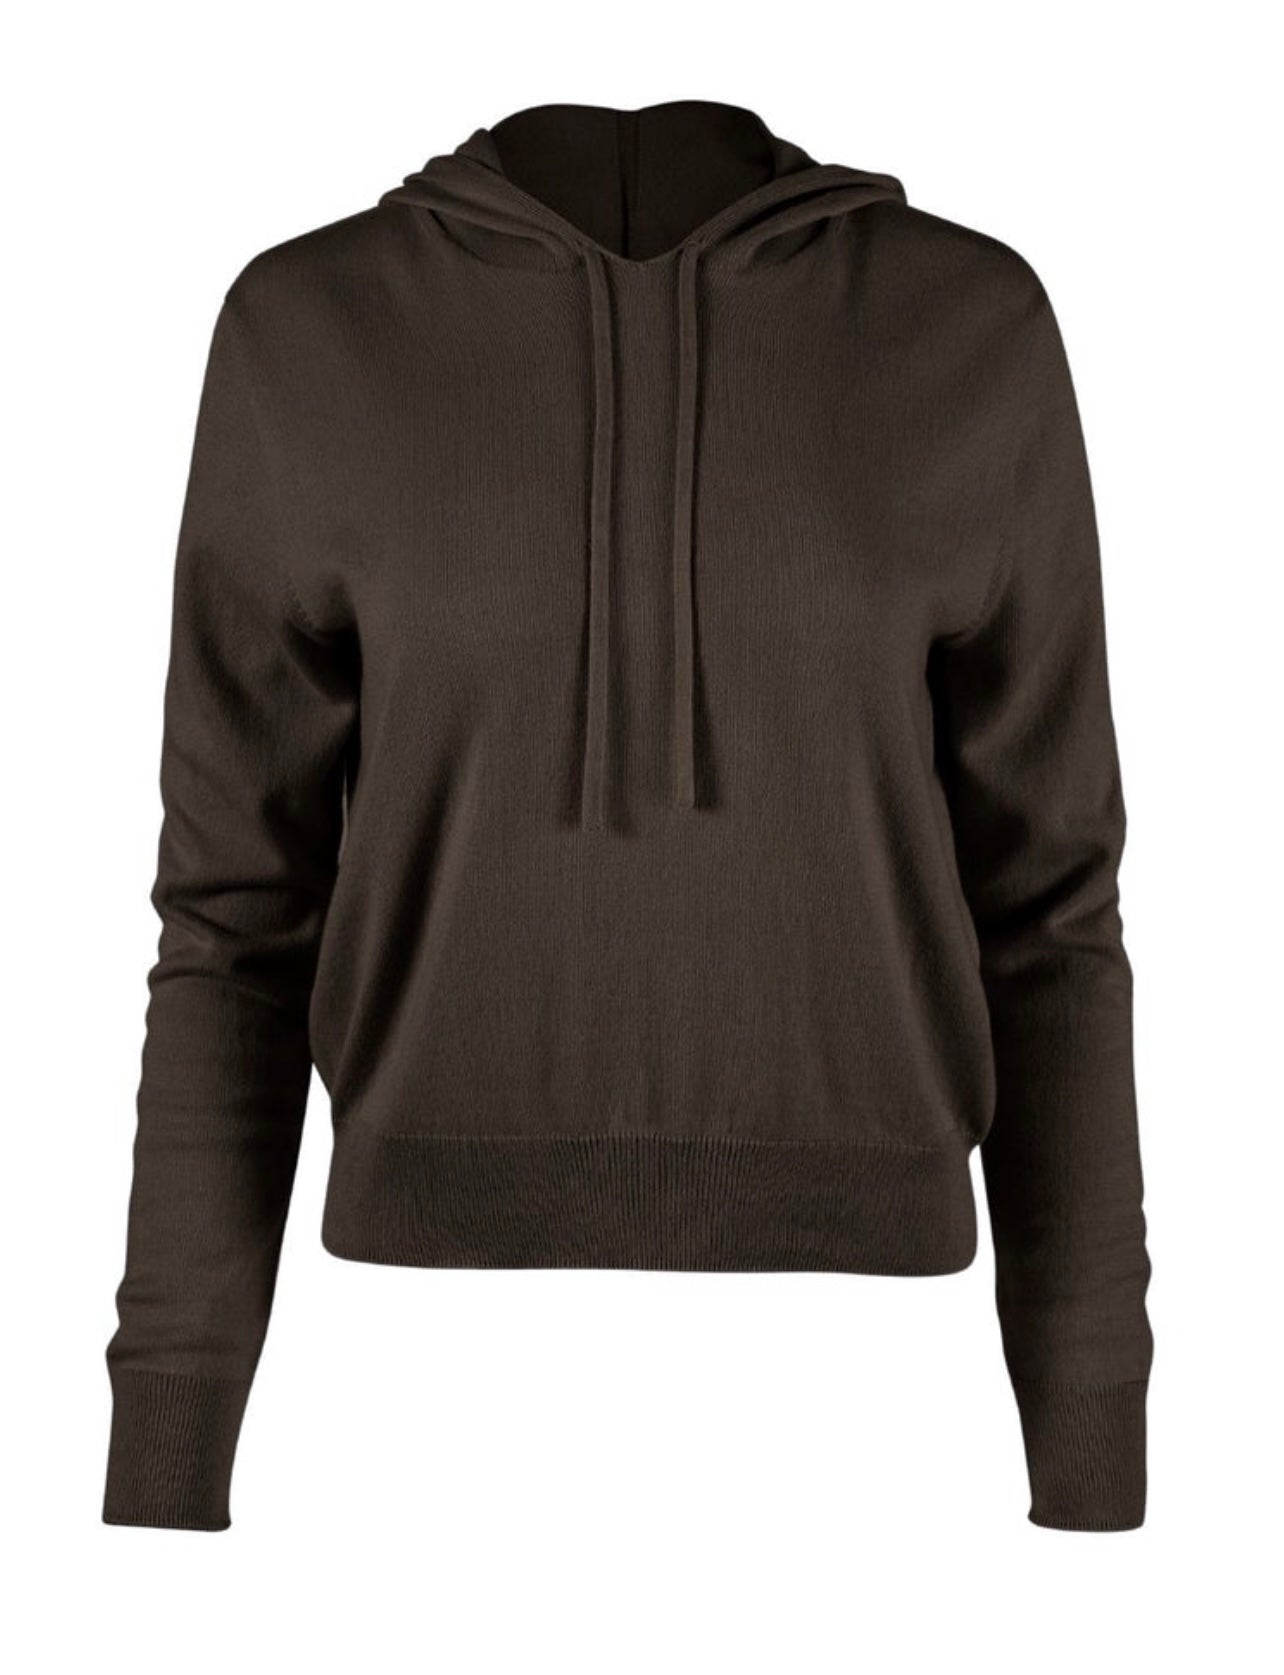 Sskein - Cropped Hoodie in Many Colors